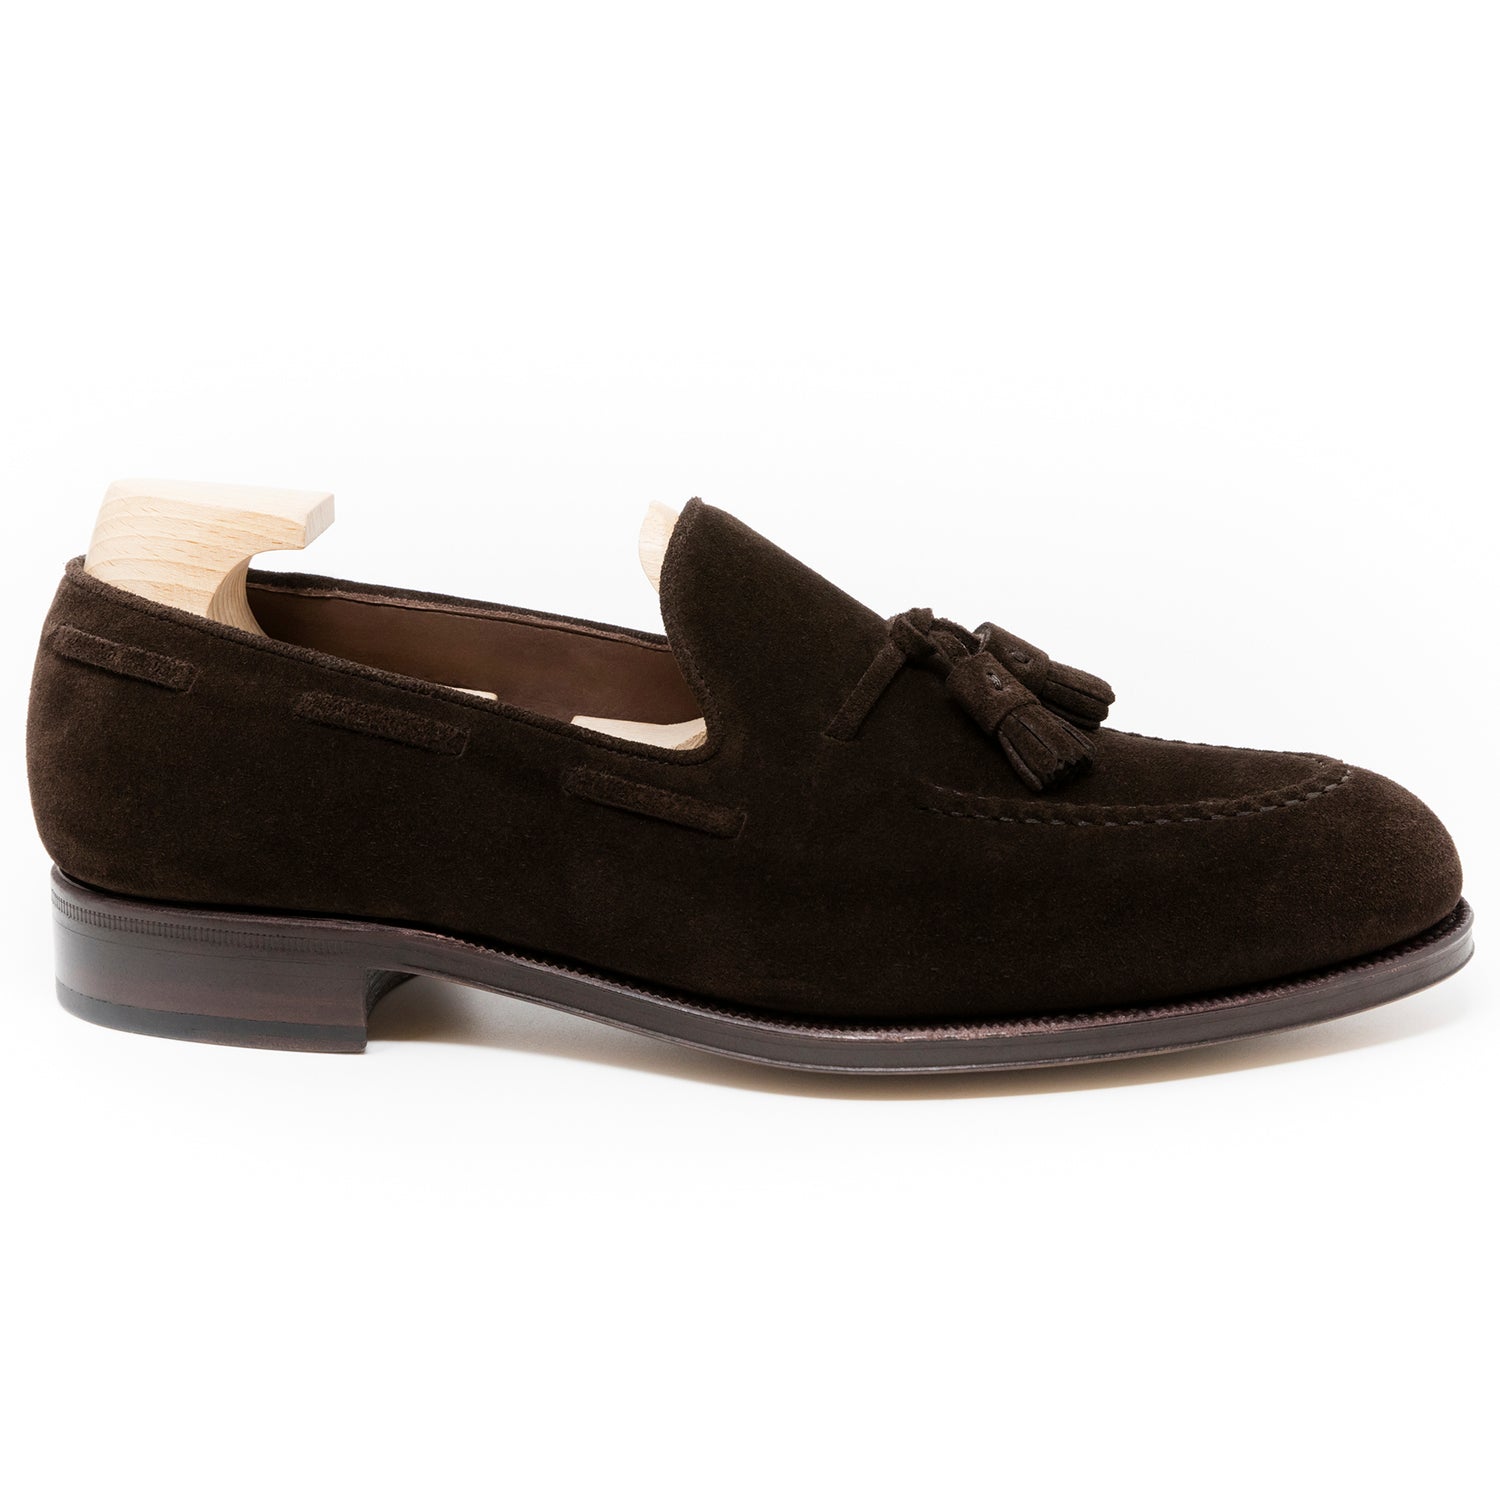 TLB Mallorca leather shoes 656 / JONES / SUEDE BROWN